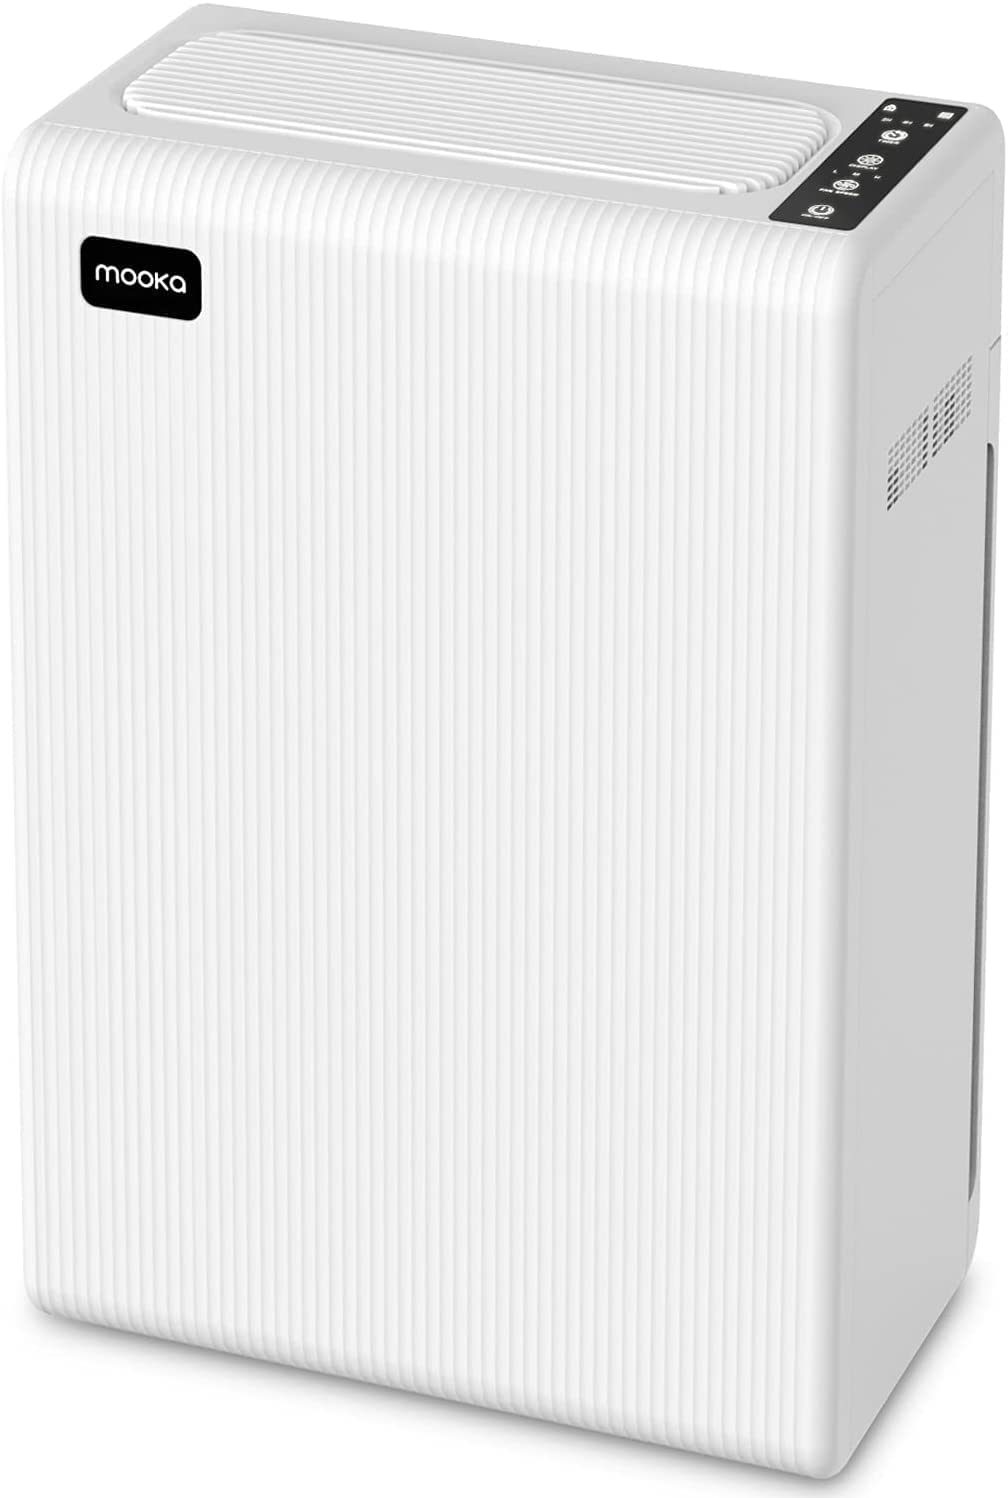 (Do not sold on Amazon)Air Purifiers for Home Large Room up to 969ft², H13 HEPA Air Filter for Pets Hair Dander Smoke Pollen Dust, Ozone Free, Portable Air Purifiers for Bedroom Office Living Room